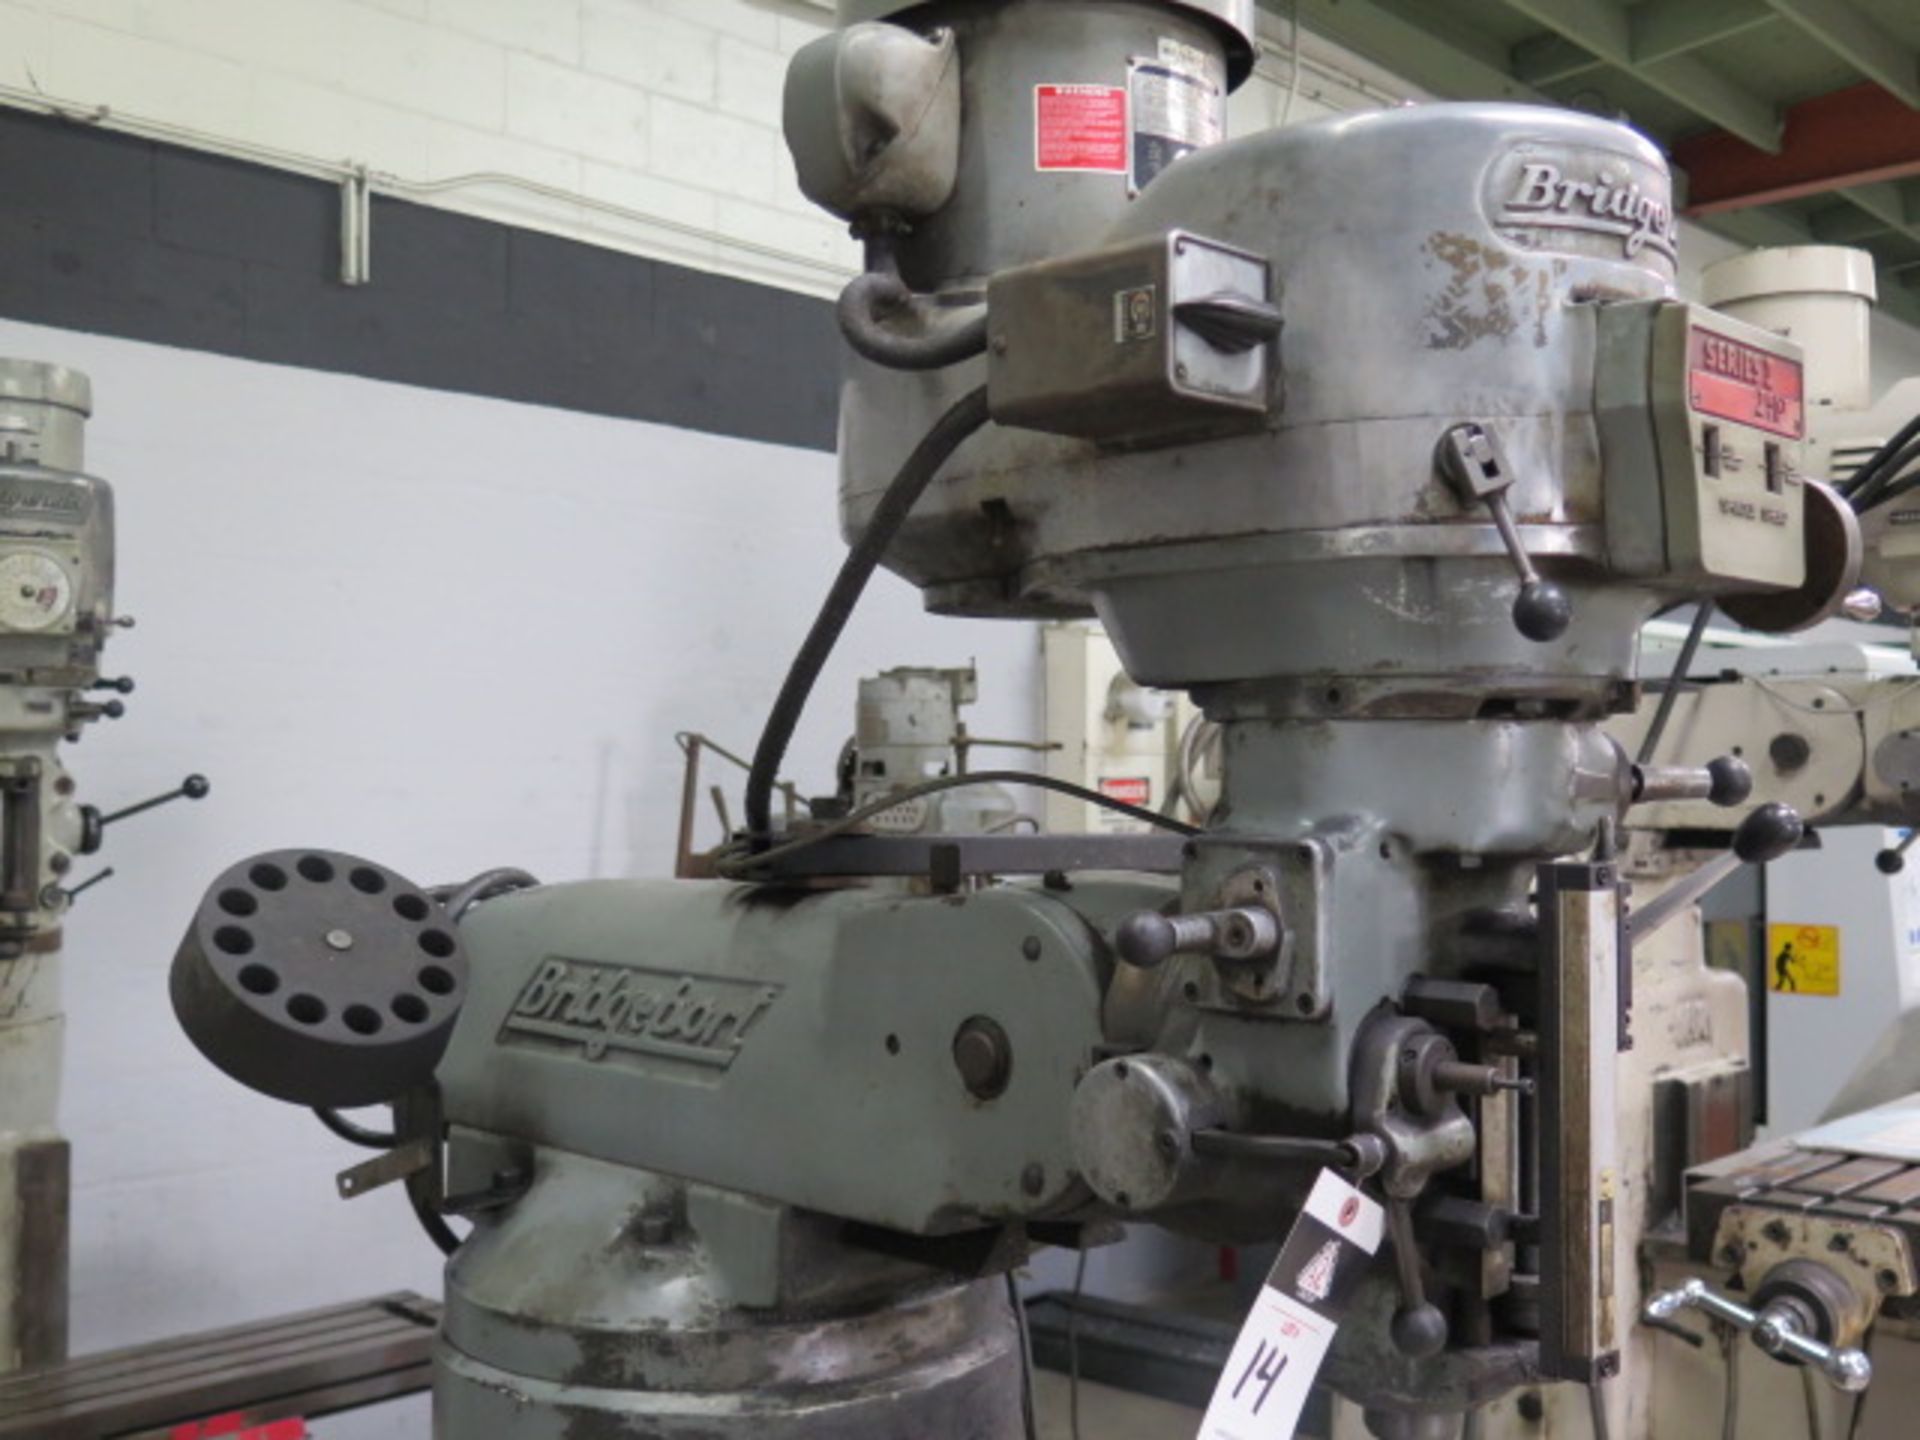 Bridgeport Series 1 – 2Hp Vertical Mill w/ Sargon 3-Axis DRO, 60-4200 Dial RPM, SOLD AS IS - Image 6 of 12